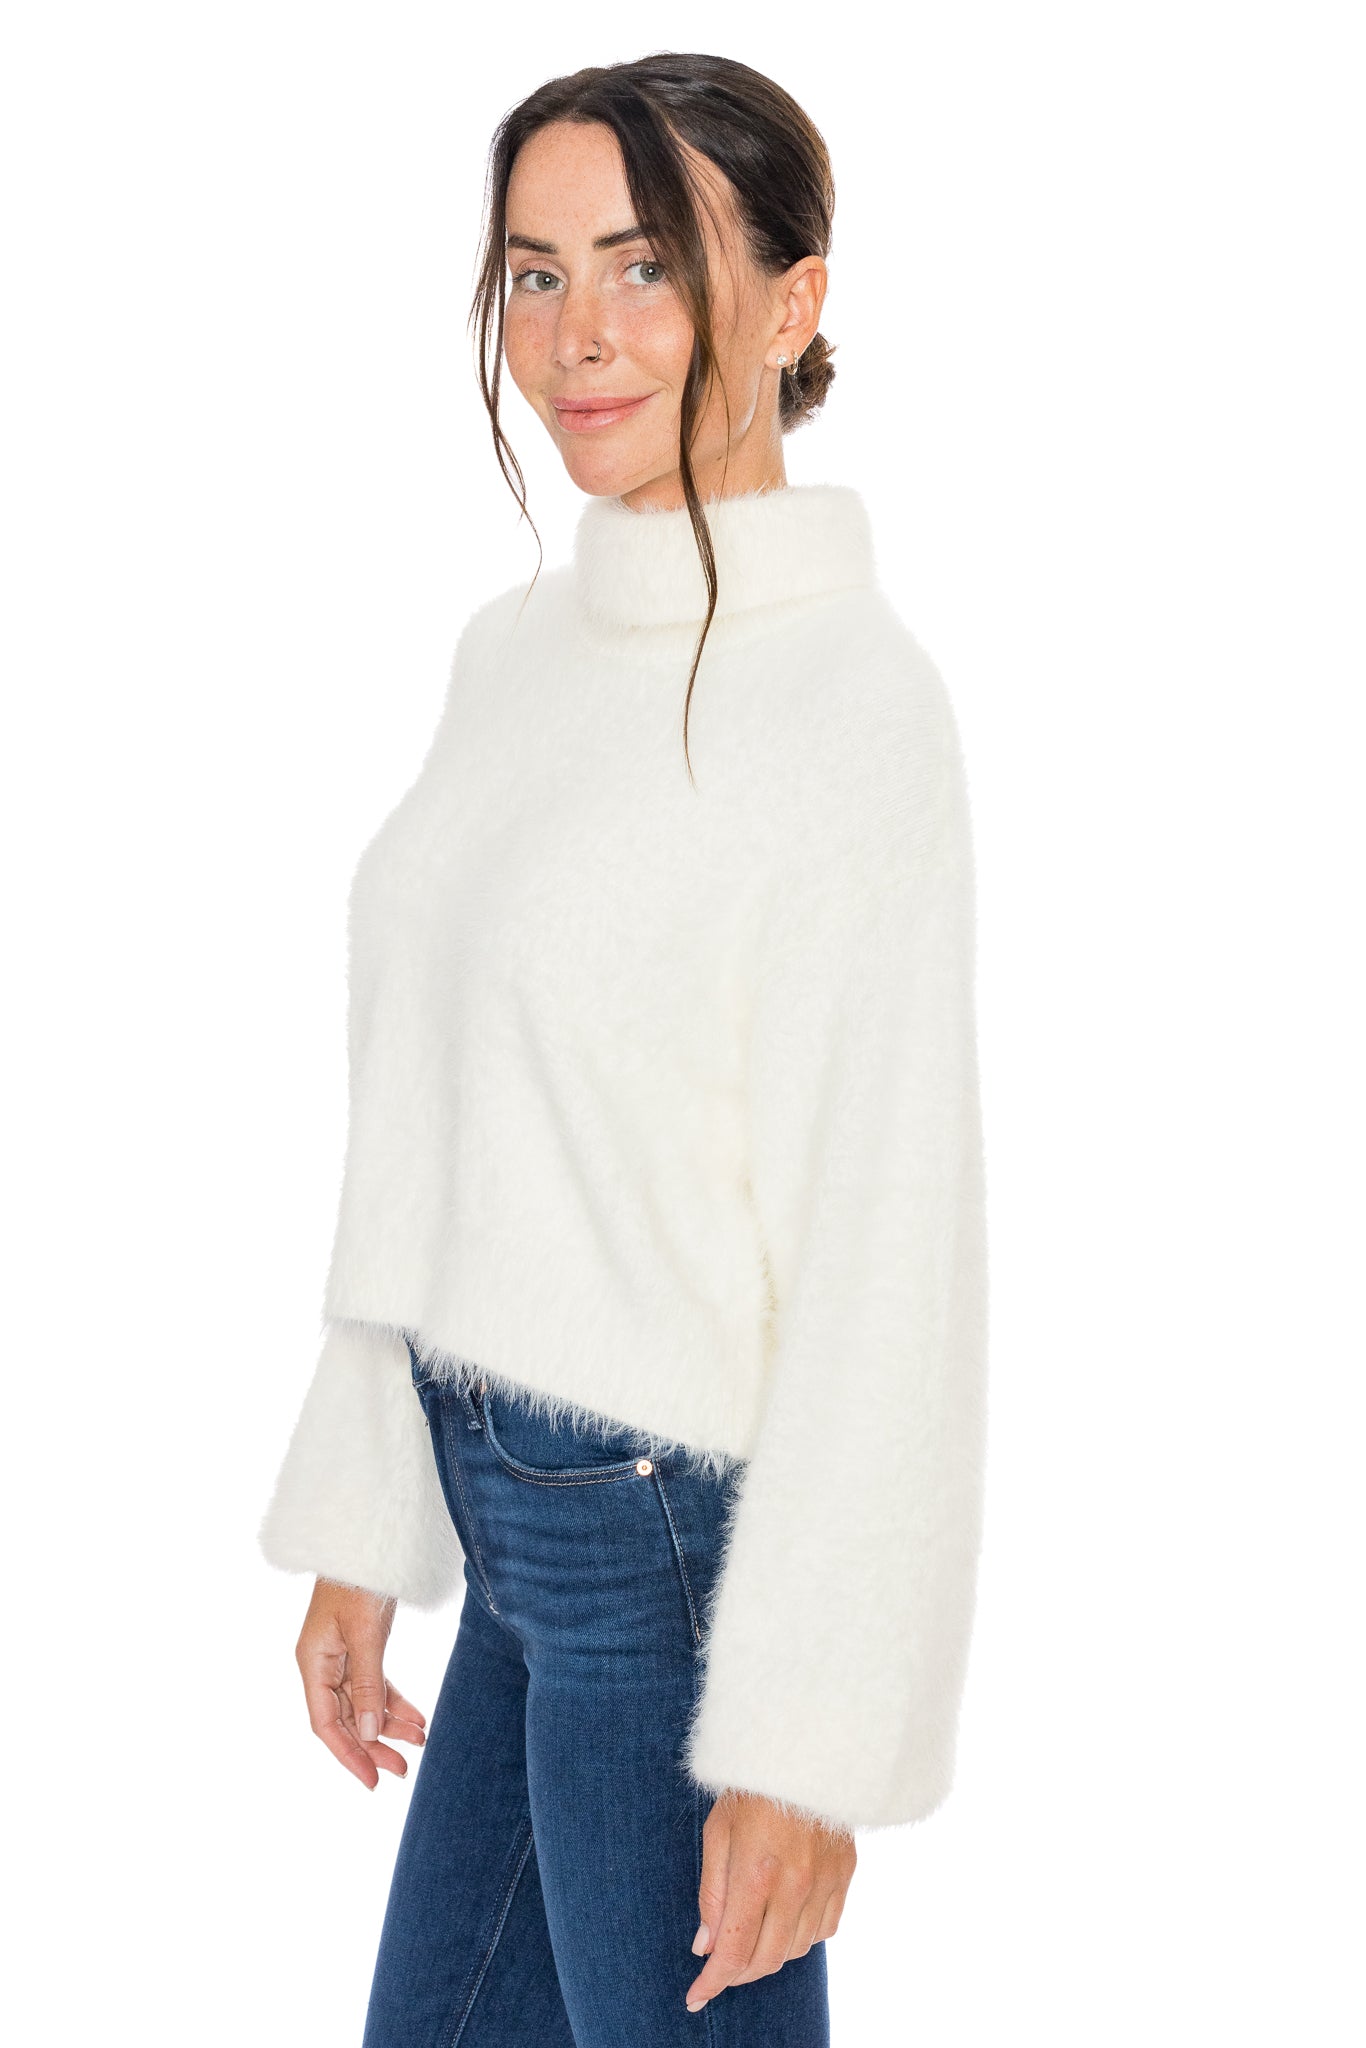 Chester Sweater by Show Me Your Mumu